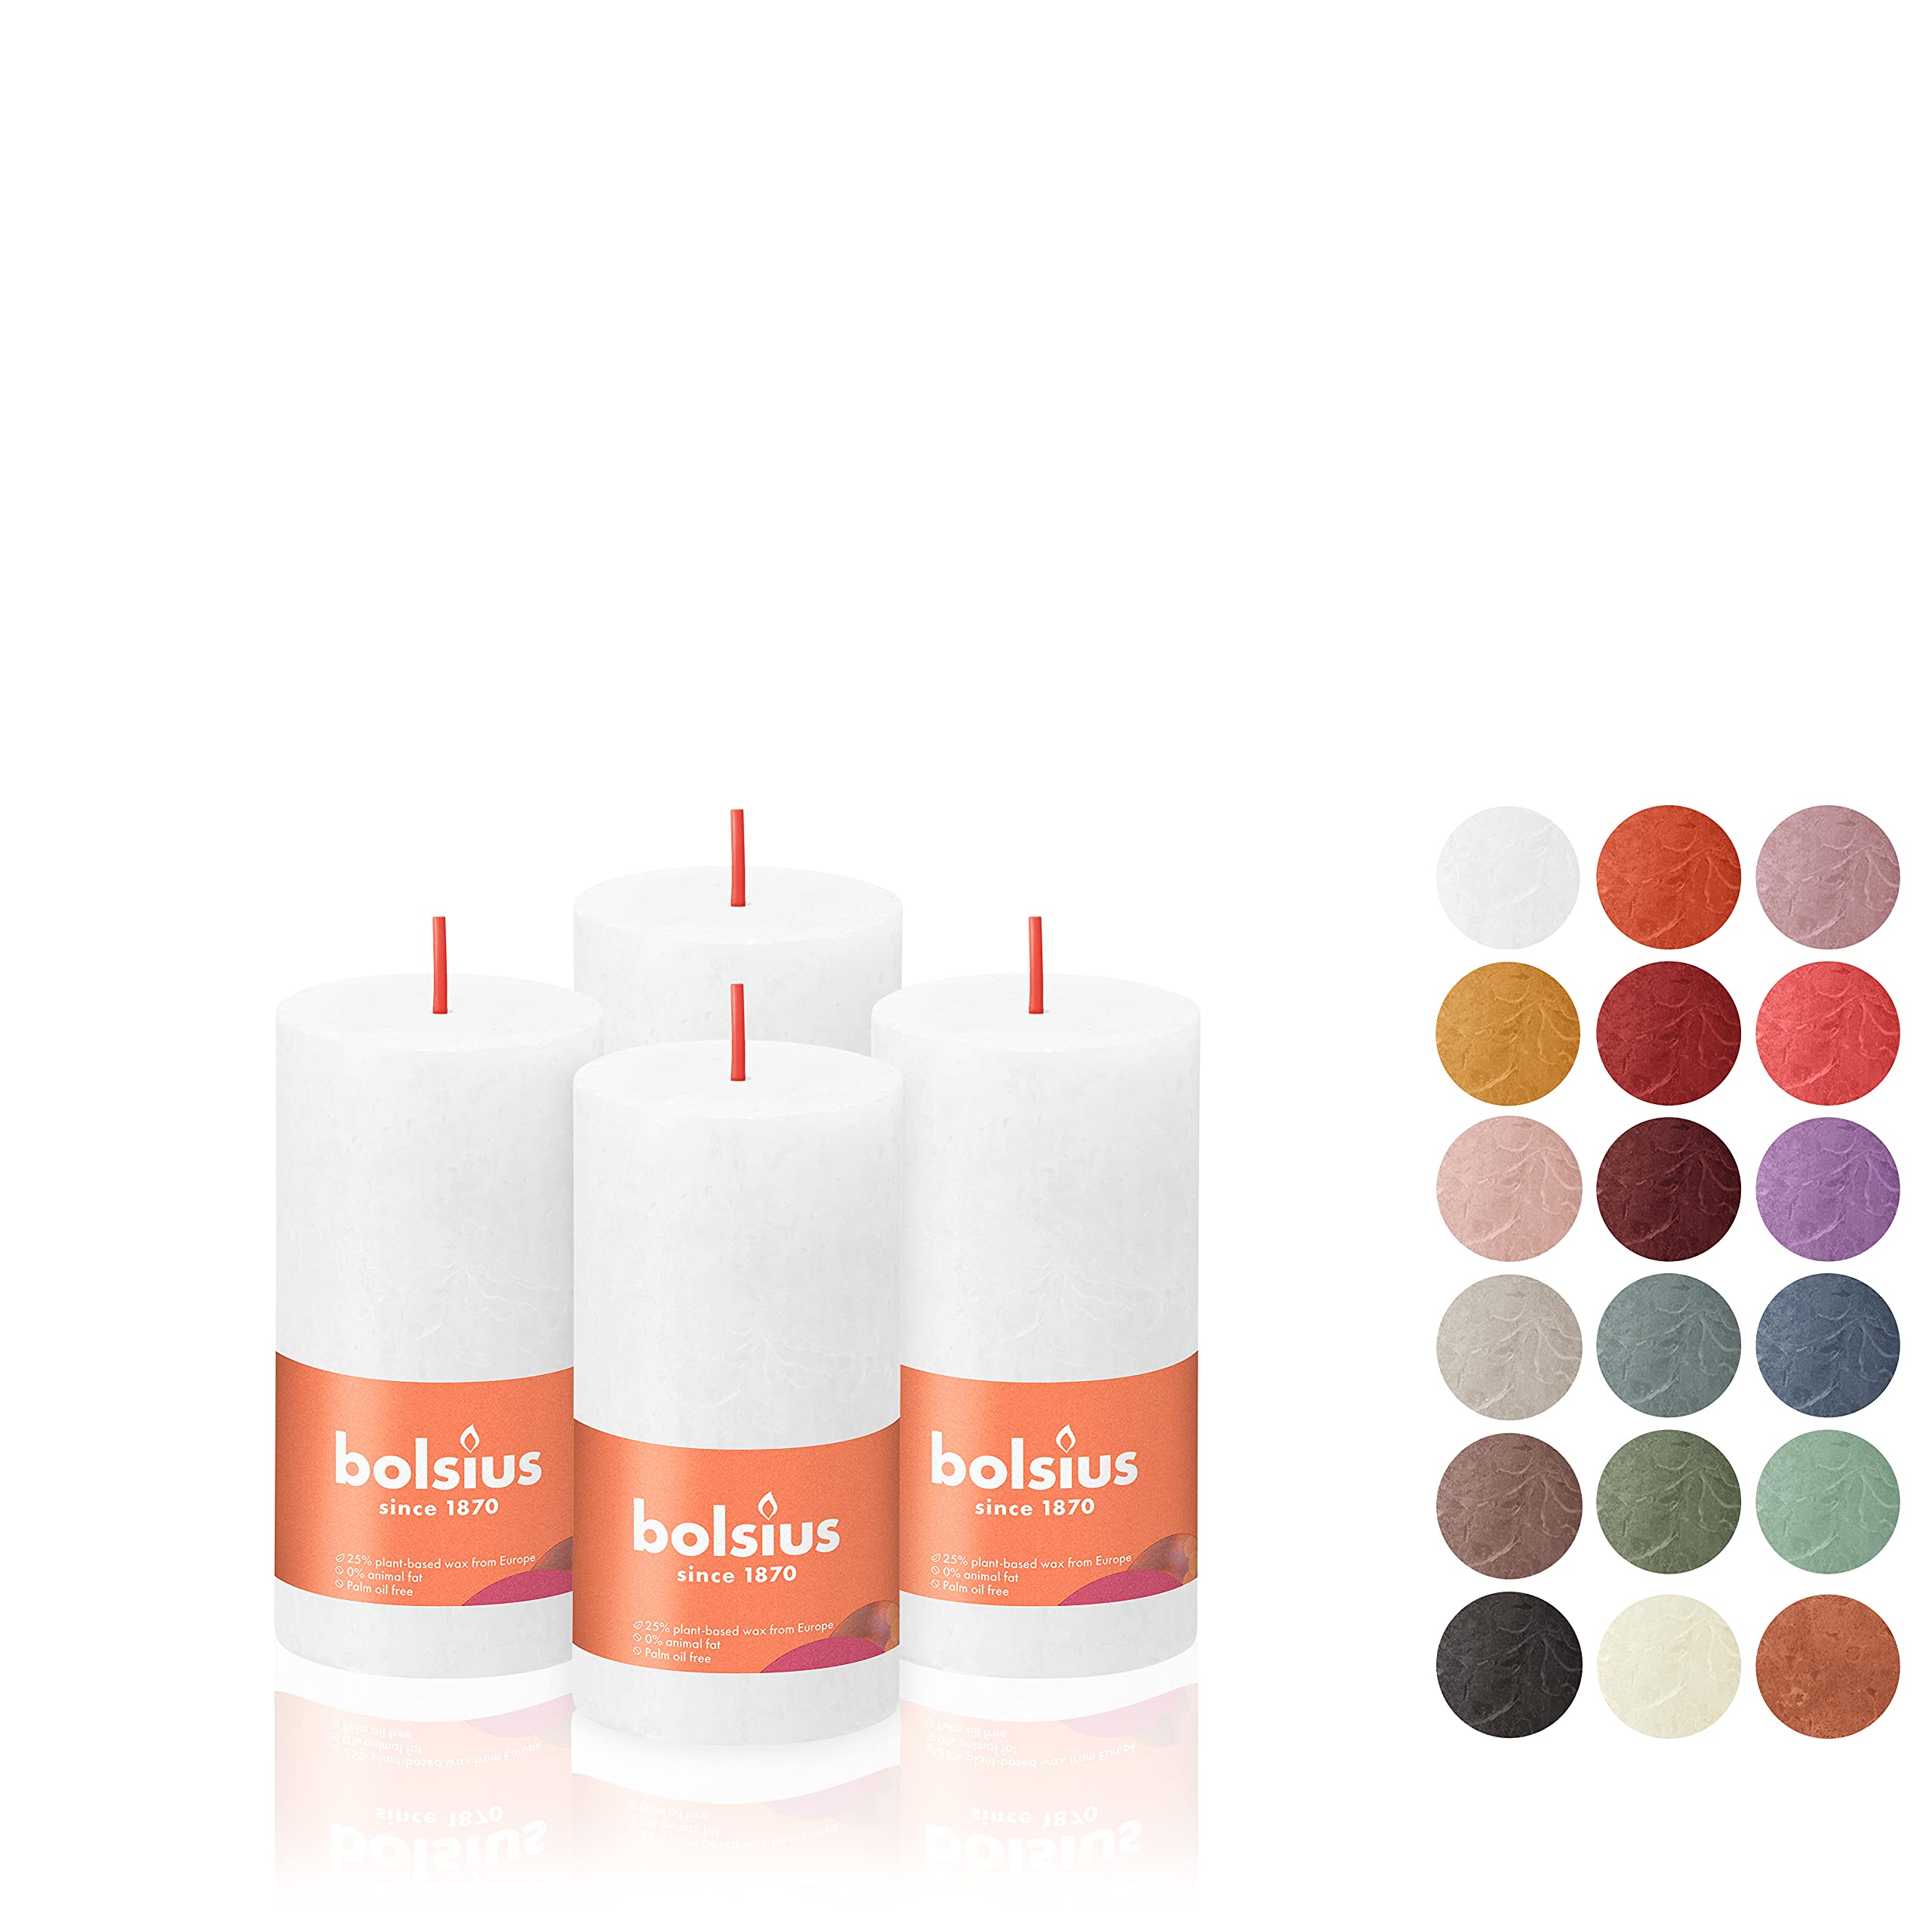 BOLSIUS 4 Pack Pillar Candles - 2 X 4 Inches - Premium European Quality - Natural Eco-Friendly Plant-Based Wax - Unscented Dripless Smokeless 30 Hour Party Décor and Wedding Candles  - Like New